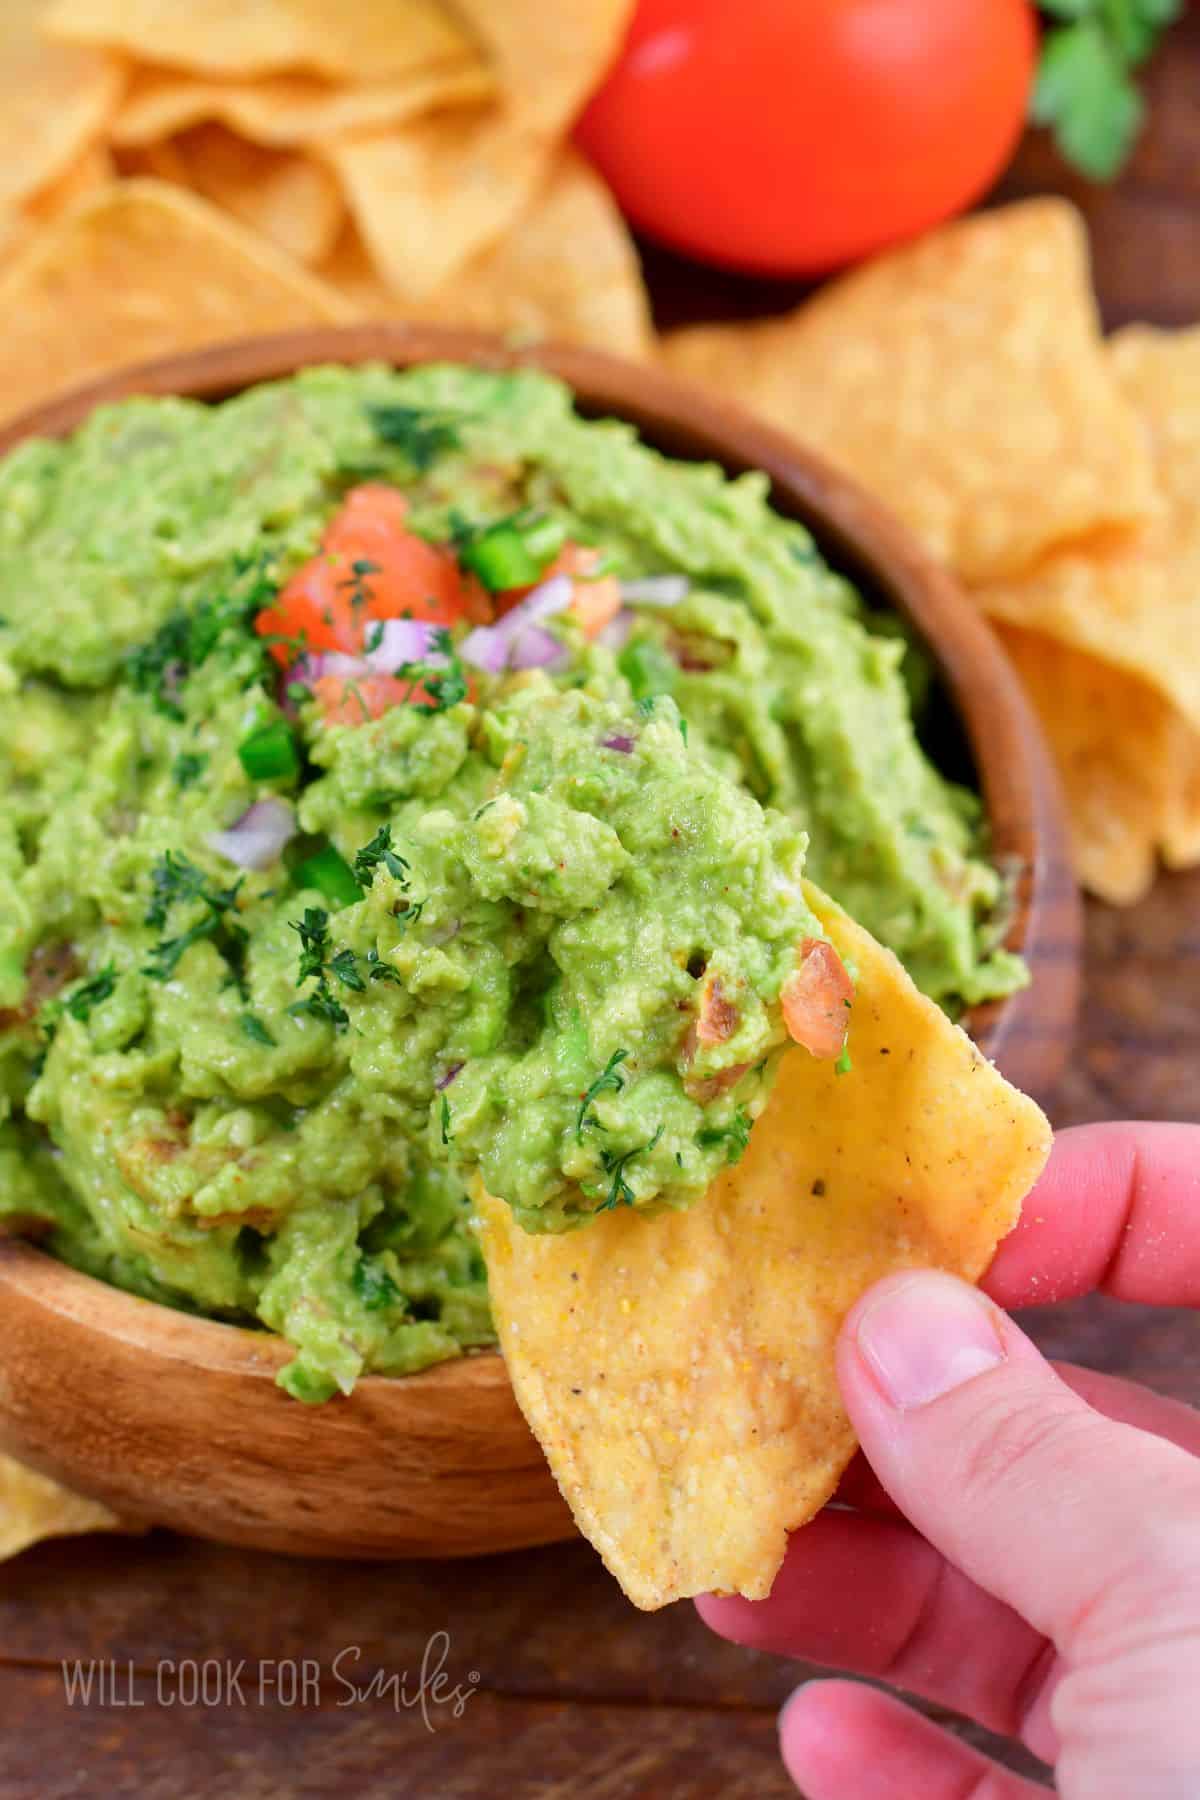 some guacamole on a yellow tortilla chip.